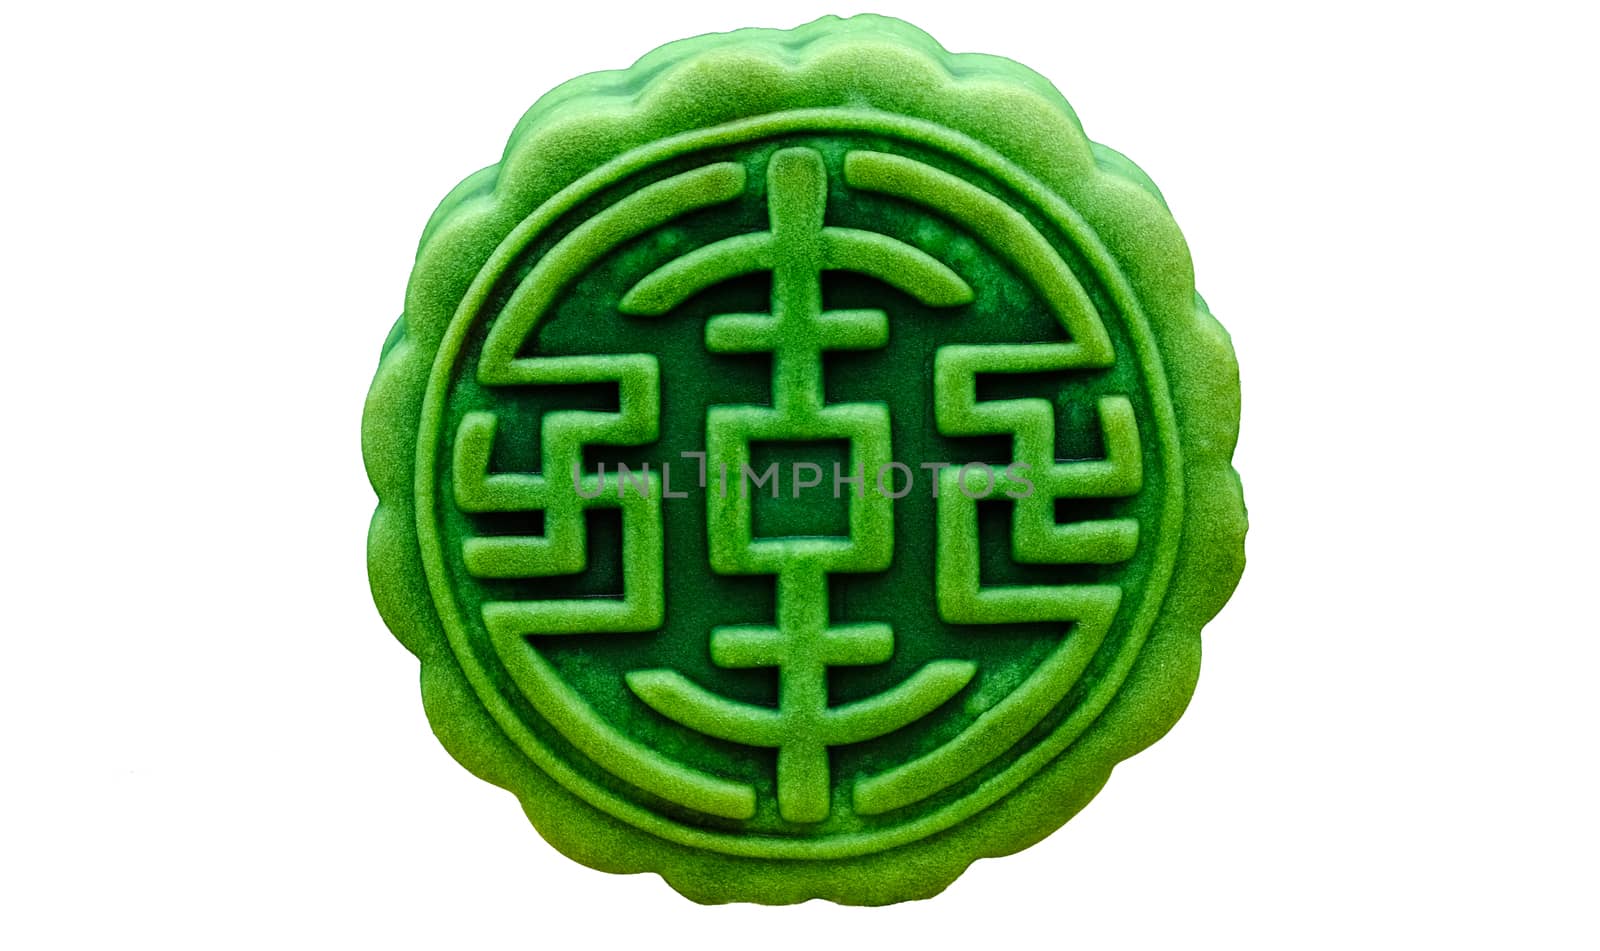 moon-cake, a traditional chinese pastry with green tea, cranberry and red bean paste fillings, isolated on white background